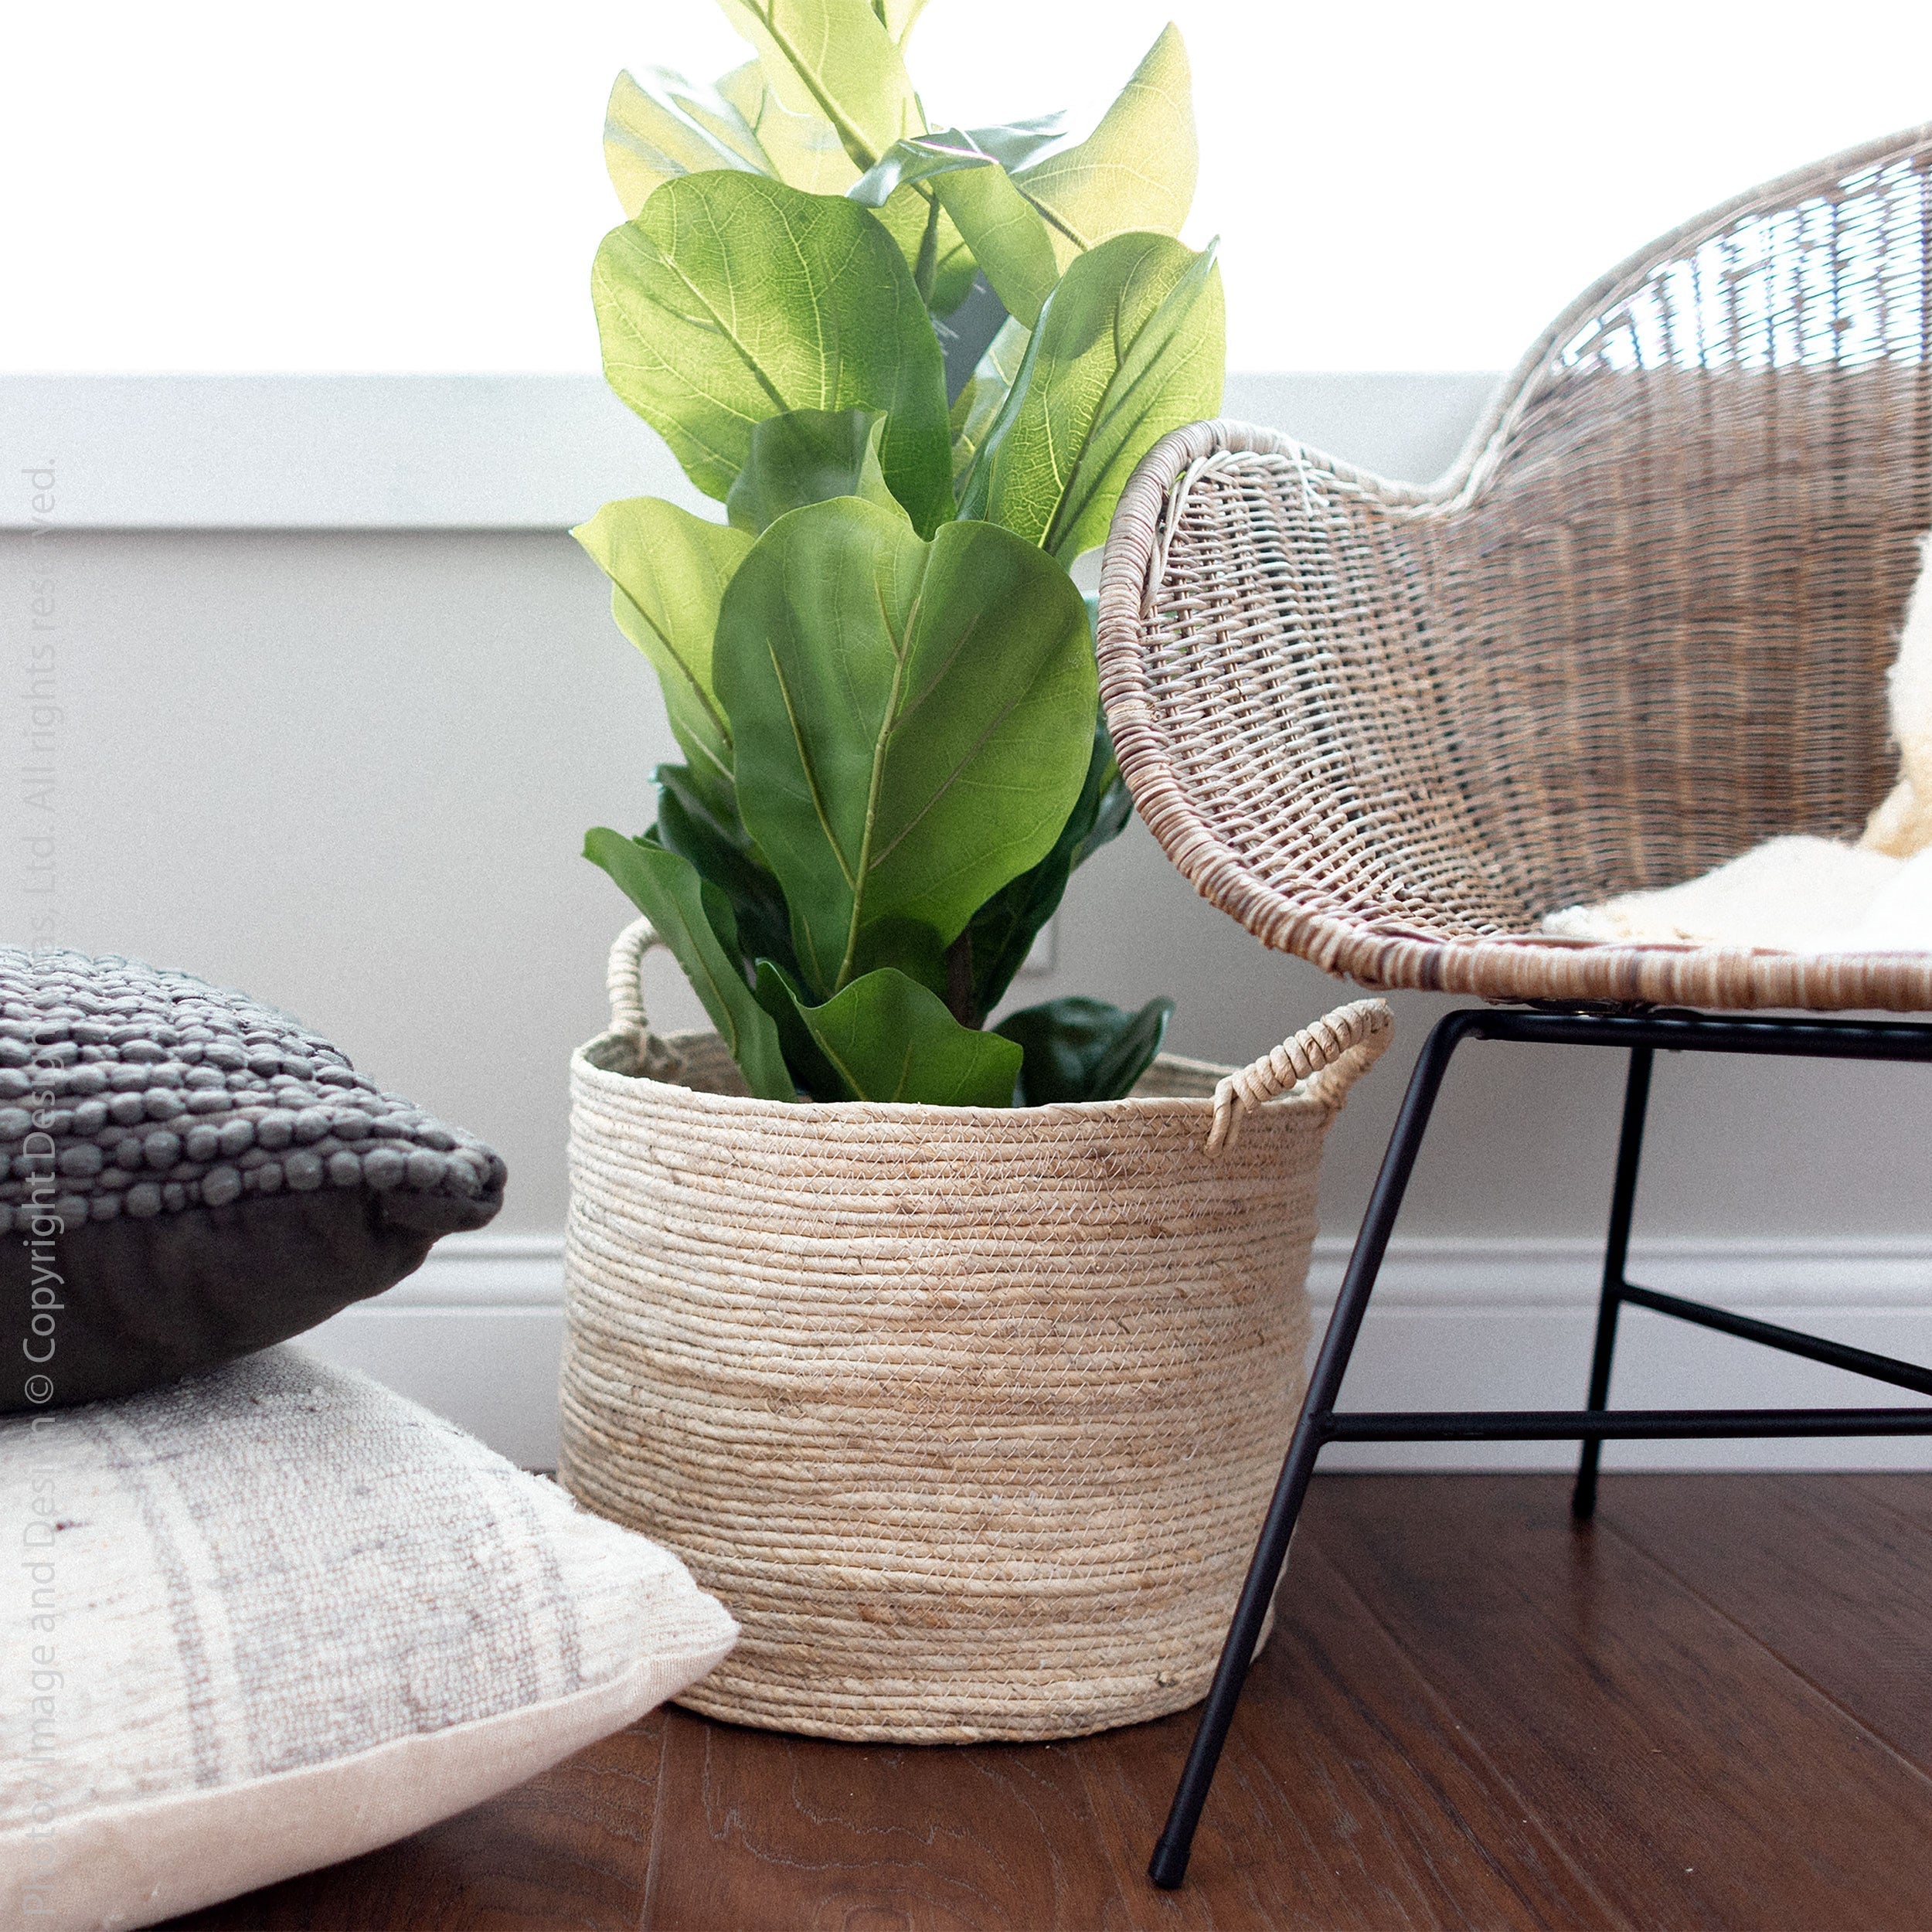 Maiz™ basket (large: handles) - Natural | Image 5 | Premium Basket from the Maiz collection | made with Corn husk for long lasting use | sustainably sourced with recycled materials | texxture